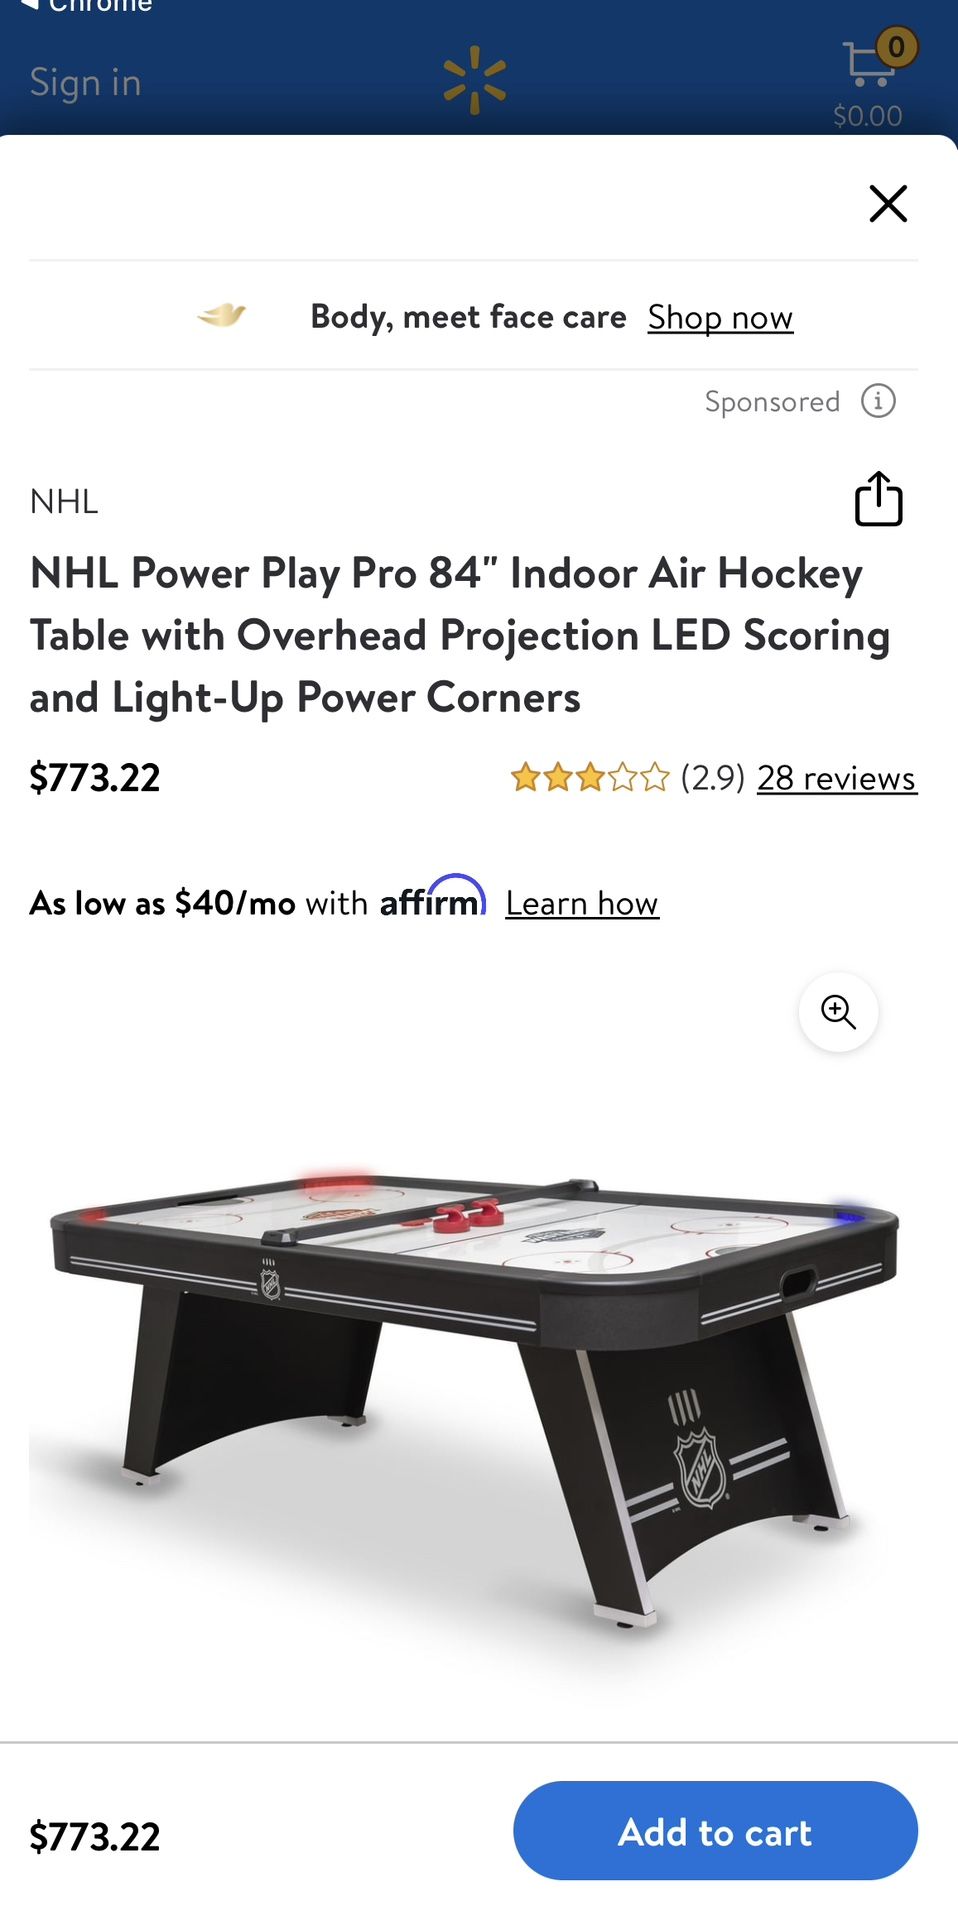 NHL Power Play Pro 84" Indoor Air Hockey Table with Overhead Projection LED Scoring and Light-Up Power Corners